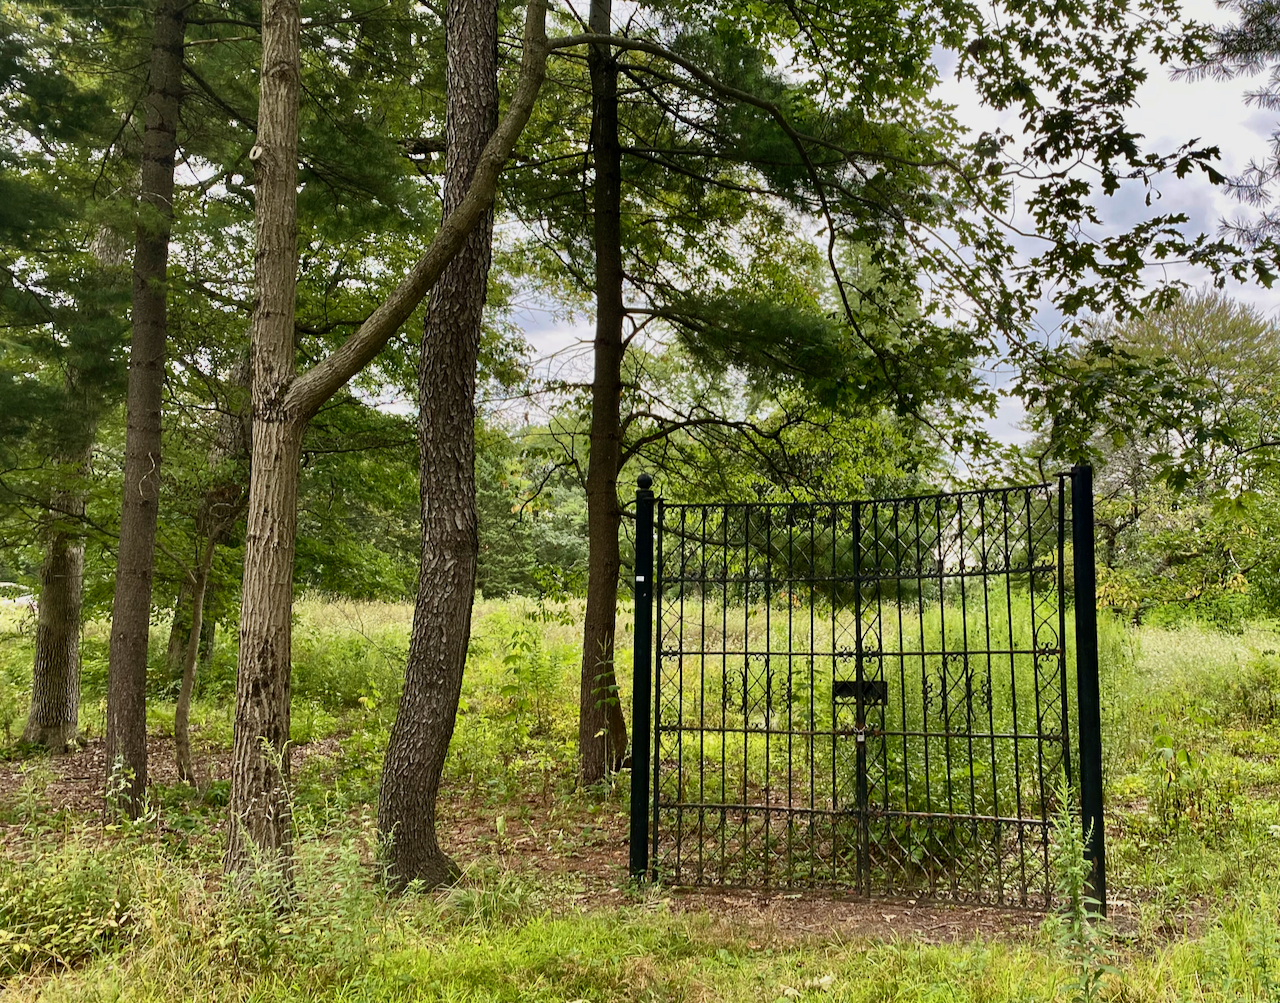 An old gate in the middle of a field but it doesn't secure anything.